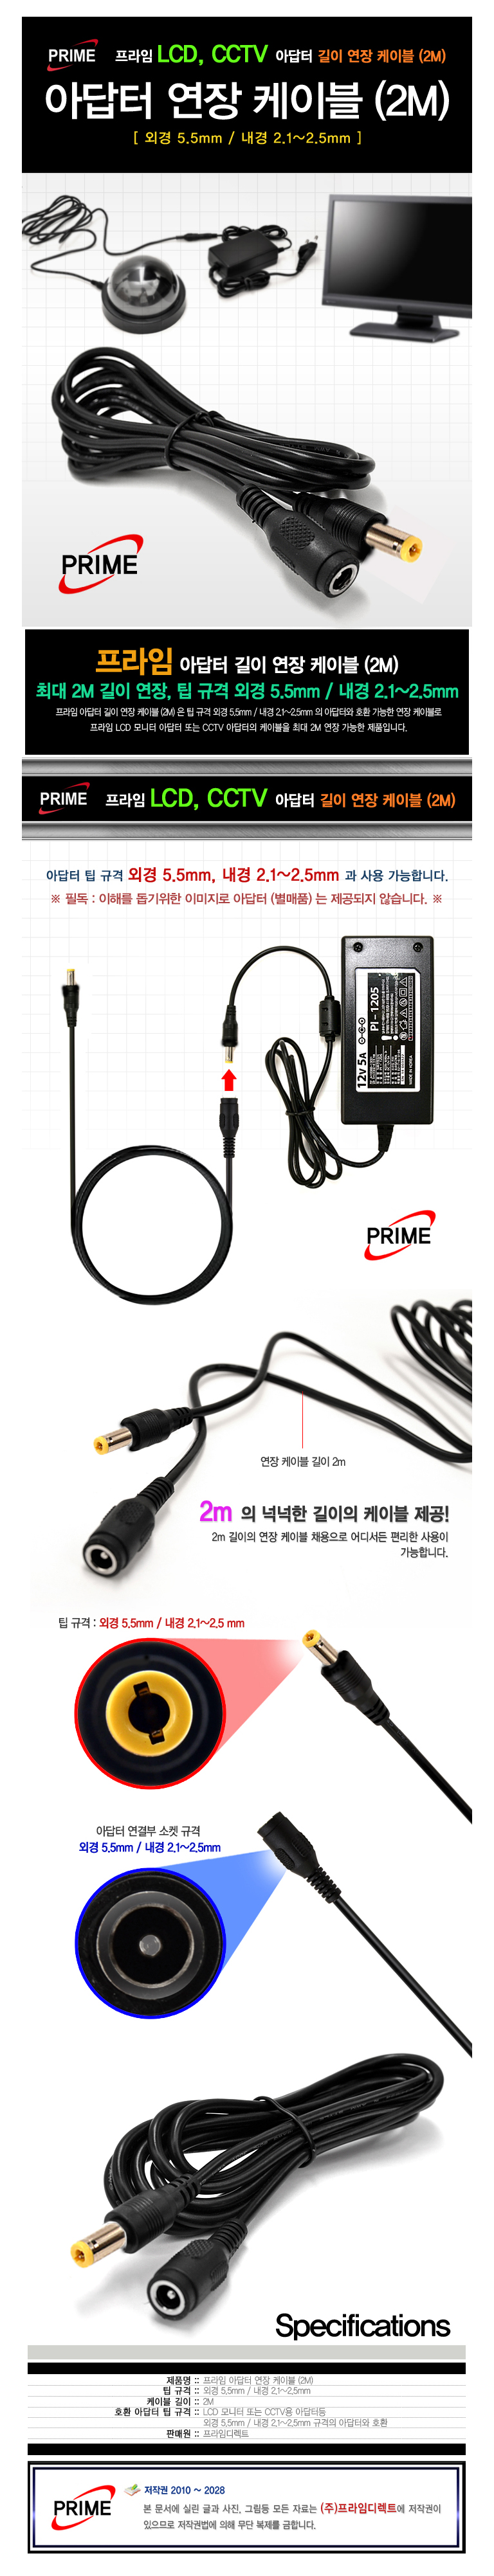 prime_cable_2m_main01.jpg